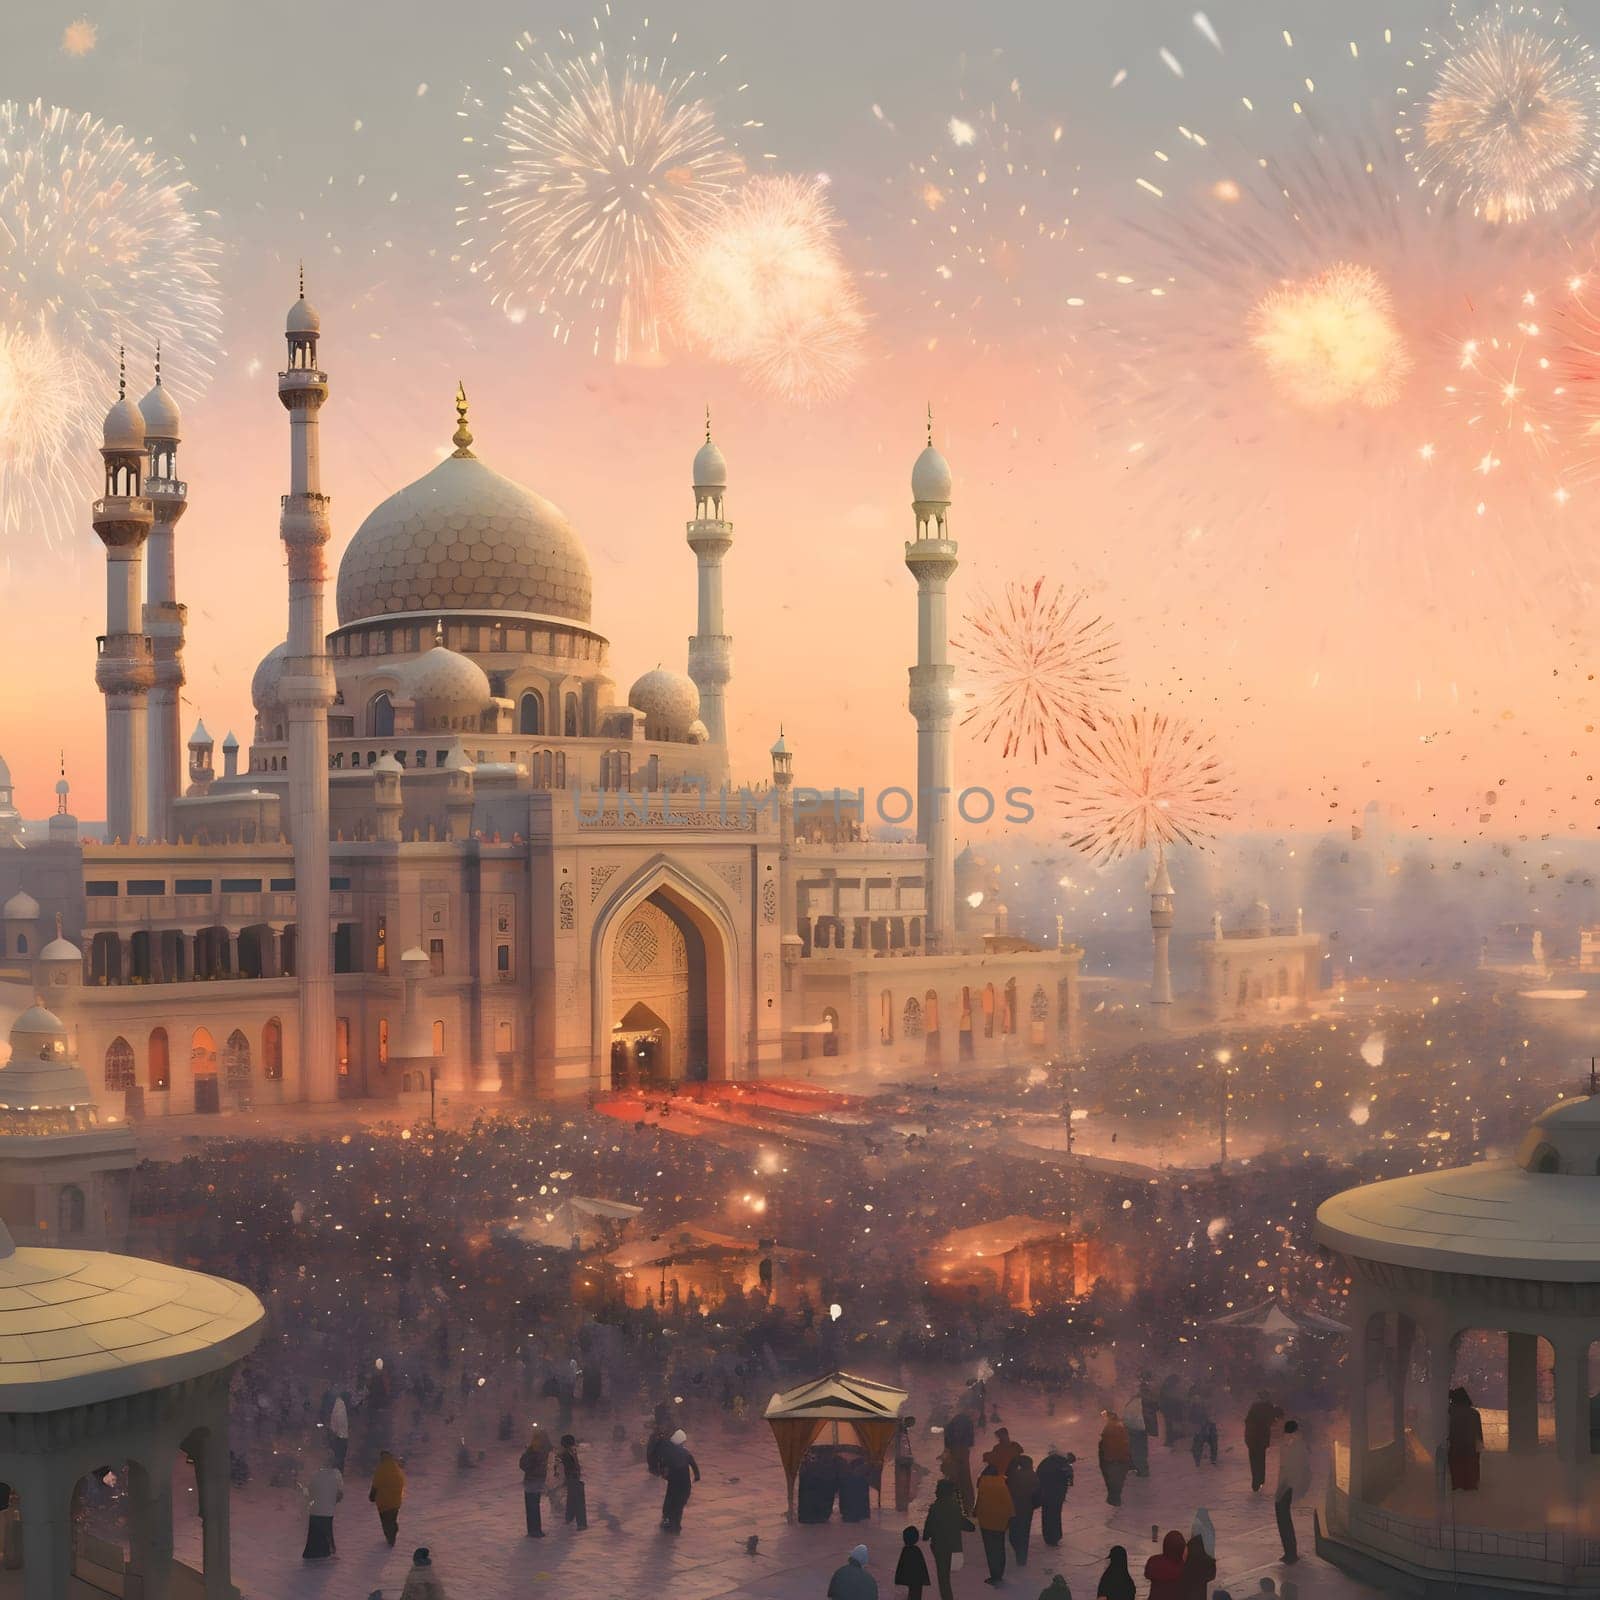 A large mosque, people gathered and a fireworks display. New Year's fun and festivities. A time of celebration and resolutions.